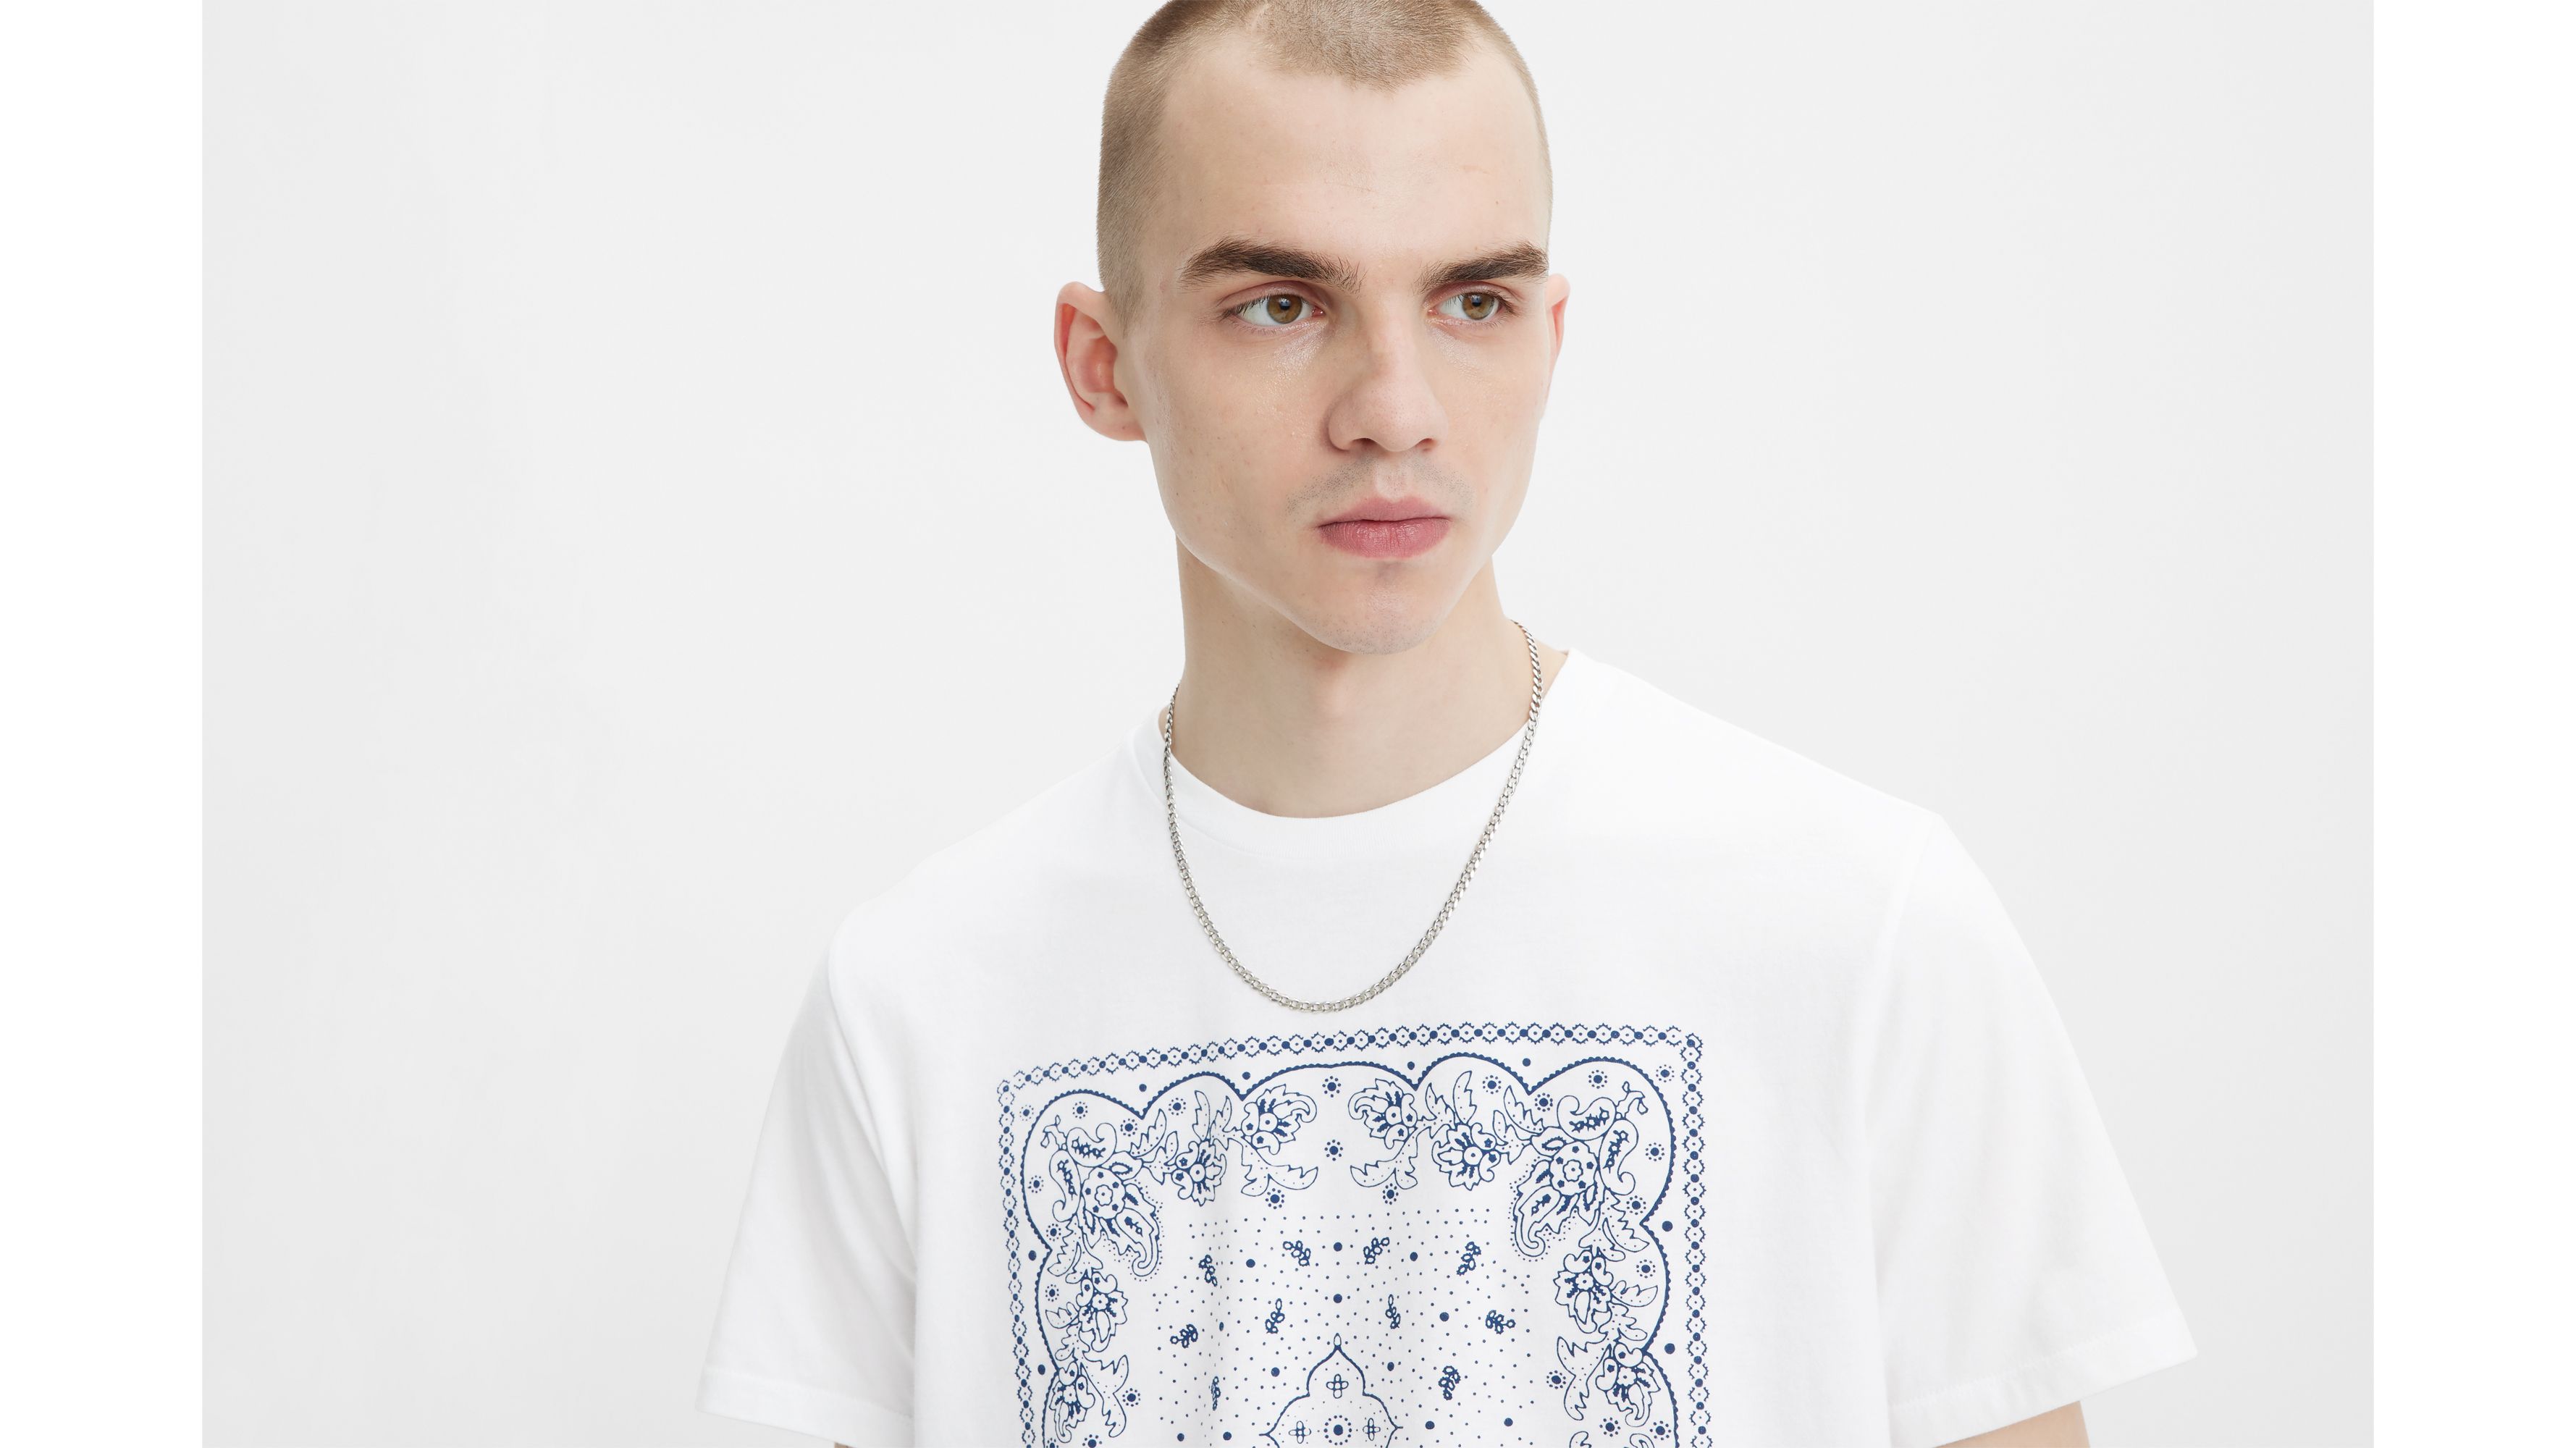 Loewe Logo-embroidered Cotton T-shirt in White for Men